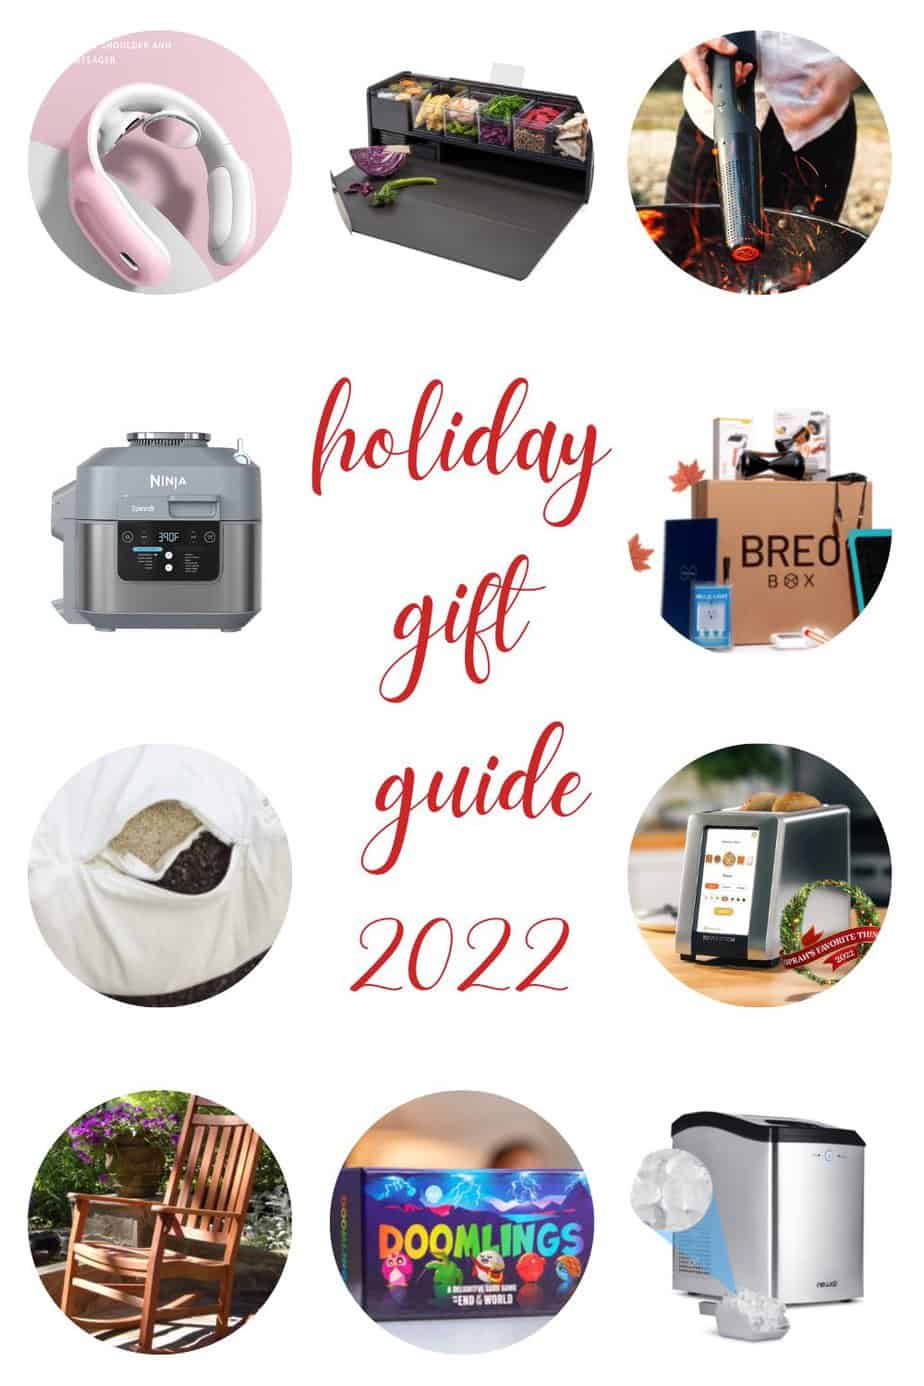 Friday Favorites: Bathroom Rugs, Holiday Front Porch and Tween Gift Guide -  Organize by Dreams